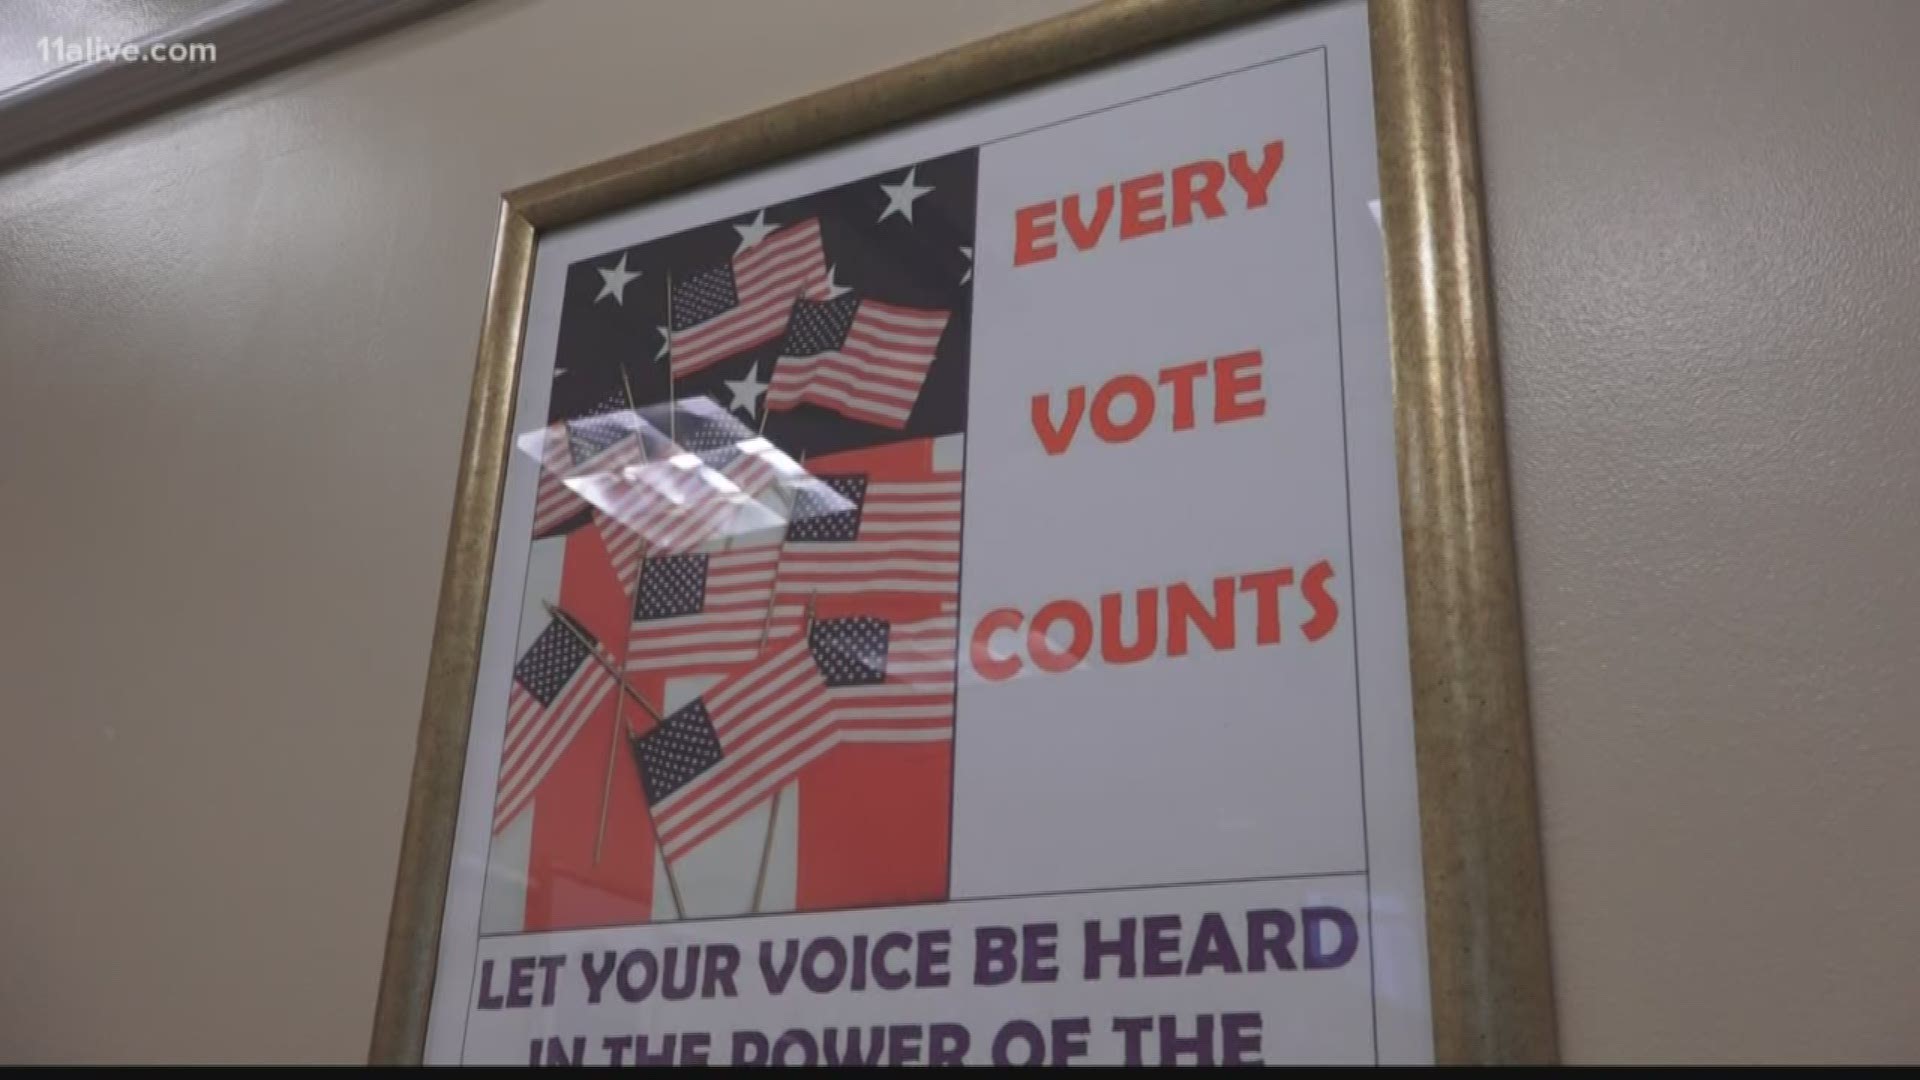 The county wants to ensure there are no mistakes when voters head to the poll for the primary.